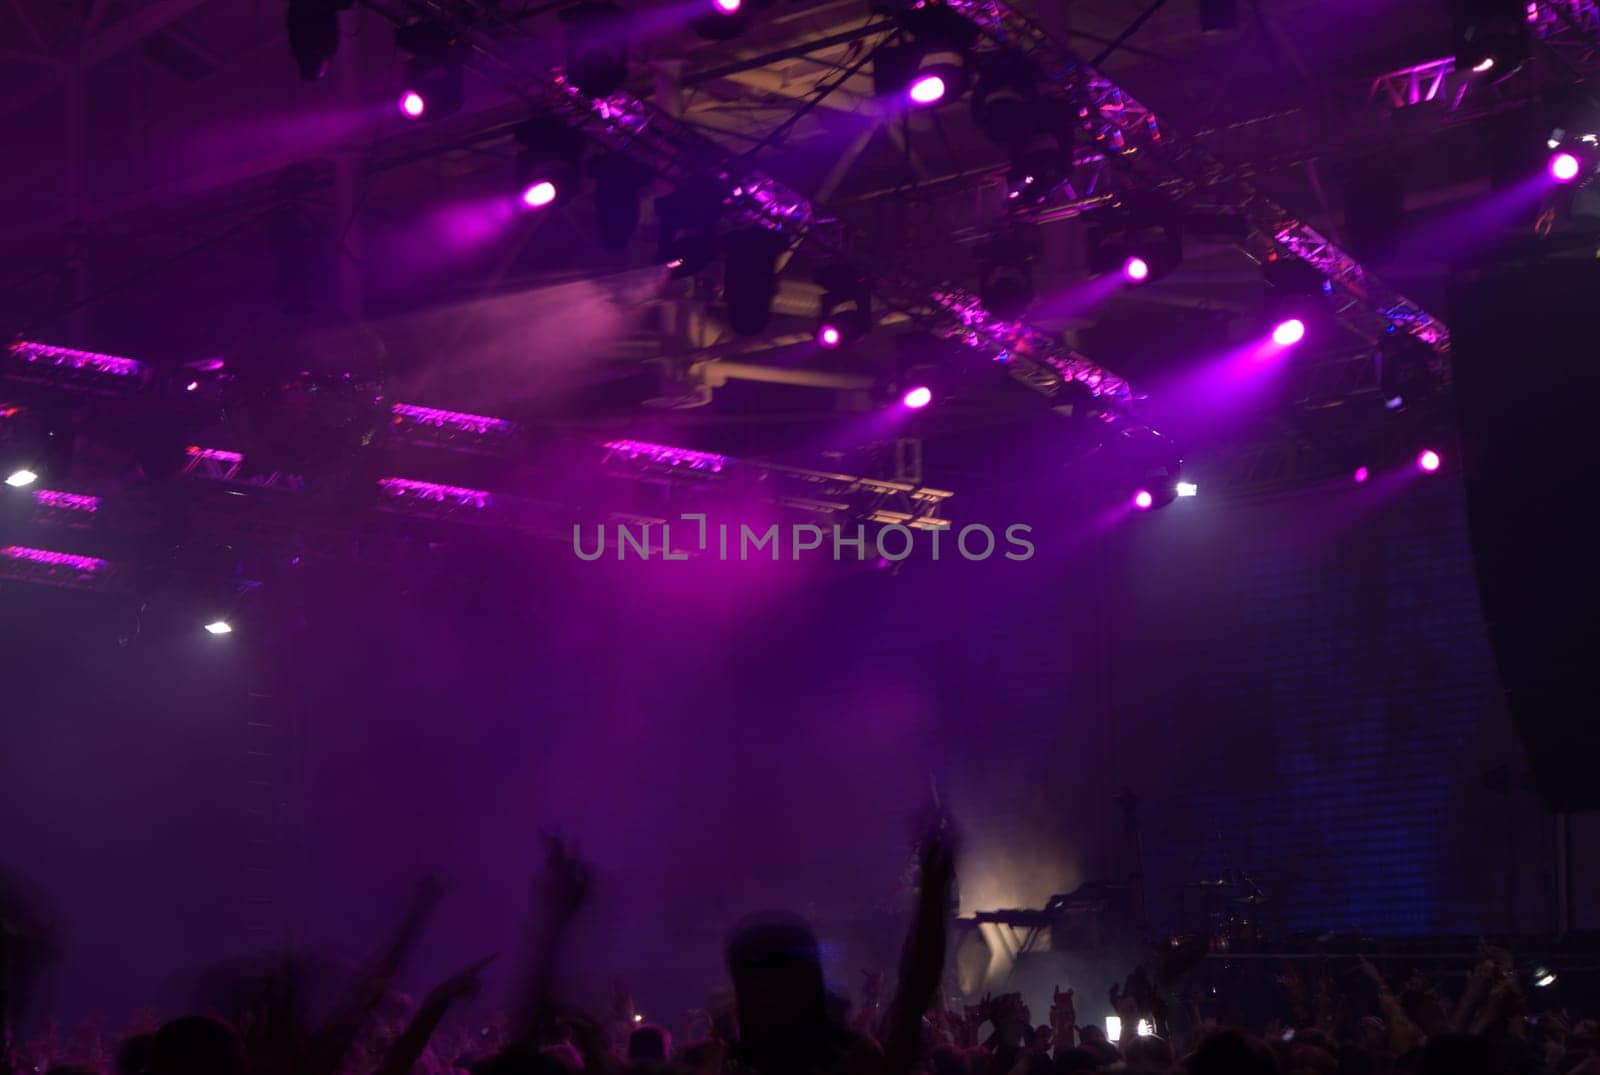 Scene. Stage equipment. The atmosphere at the concert. High quality photo